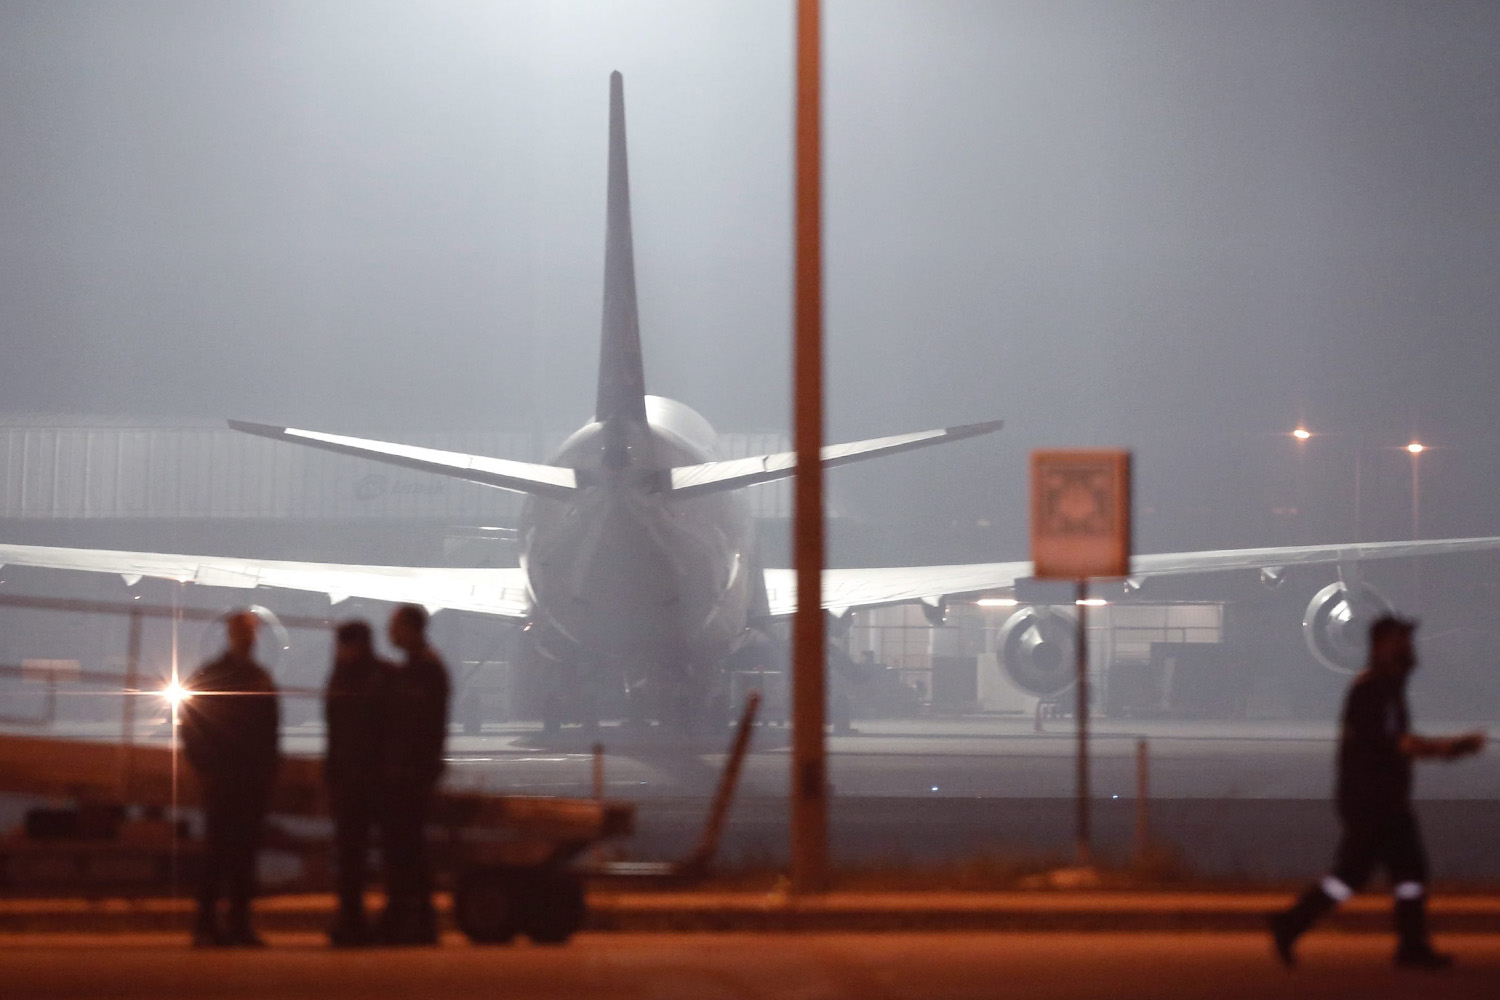 Turkish police forces arrive at the scene after hijacked airplane of a Turkish company Pegasus Airlines was landed at Sabiha Gokcen Airport in Istanbul, on Feb. 7, 2014.